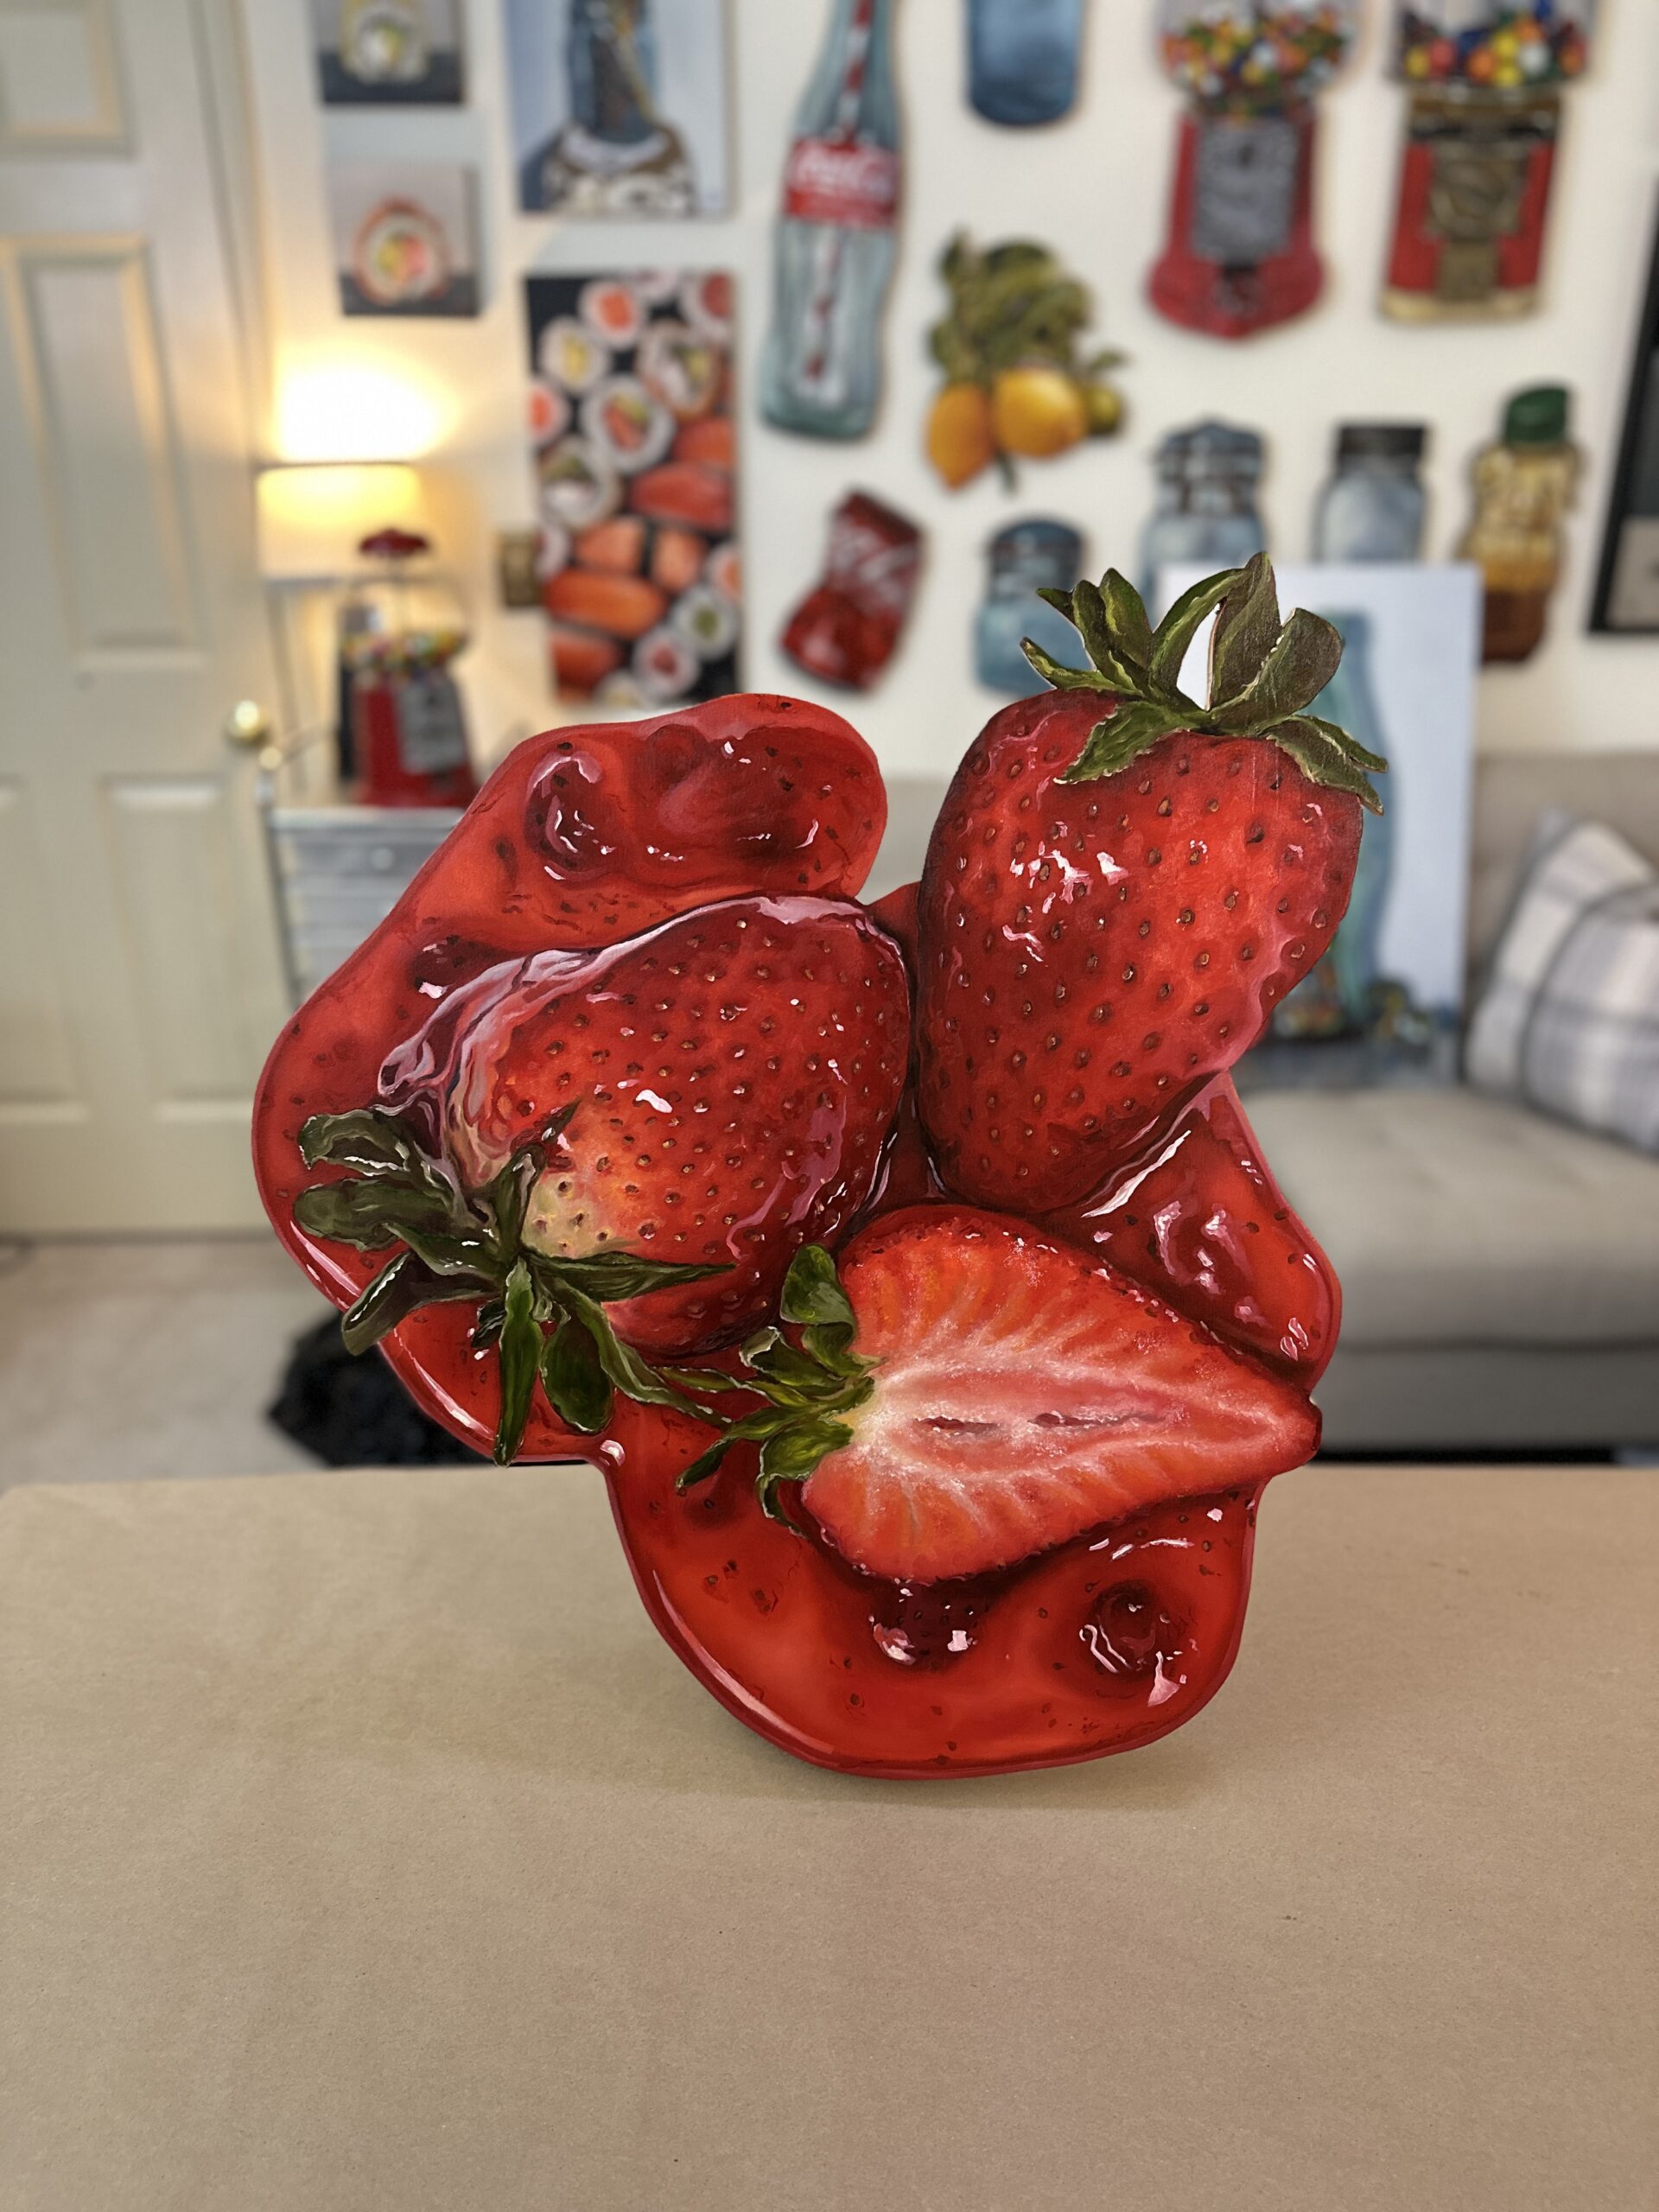 "Saucy Strawberries" 20x23" Original 3D Cut-Out Oil Painting by Abra Johnson